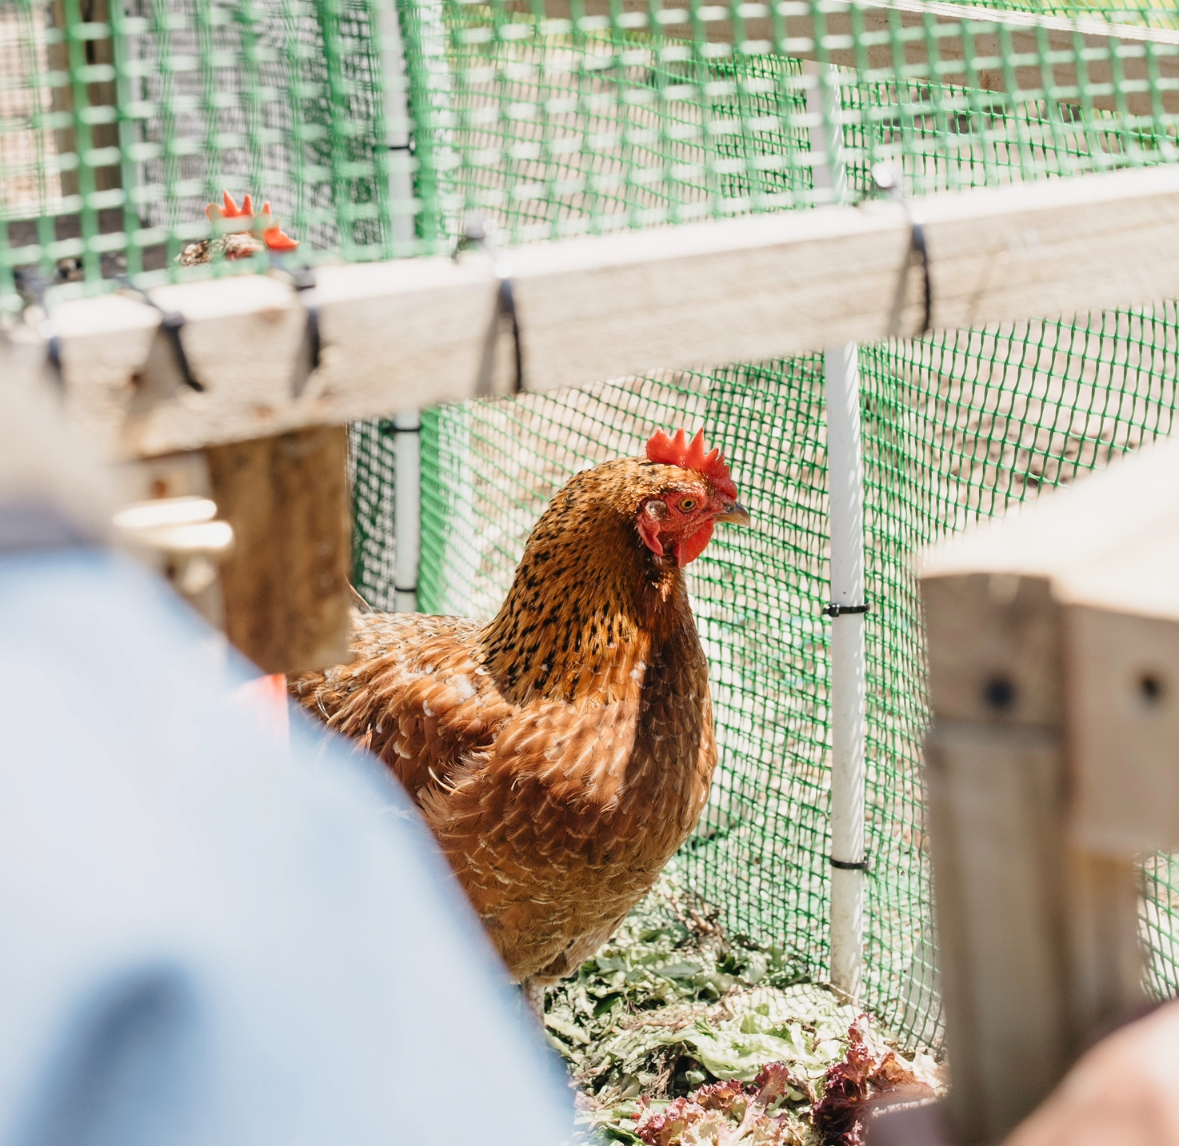 Chickens in our food garden? 🤔🐓 Here's why it's a good idea! Our chickens, much like our ducks, play a great part in helping gobble up unwanted pests like slugs, snails, small rodent and a variety of weeds. In Megan's Food Garden, it's all about team work 🌱